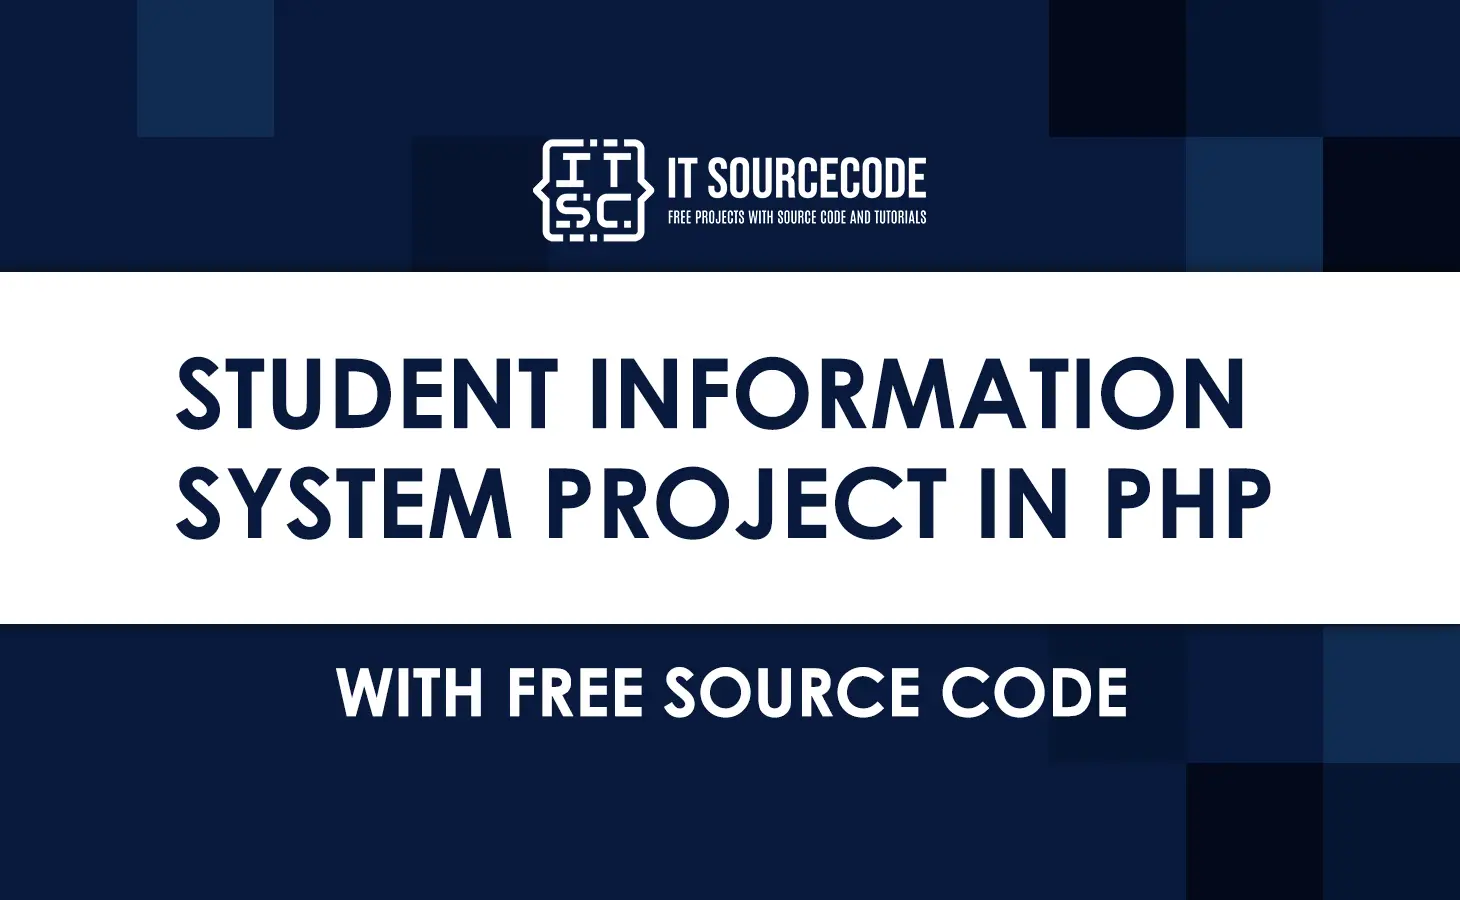 Student information system project in php